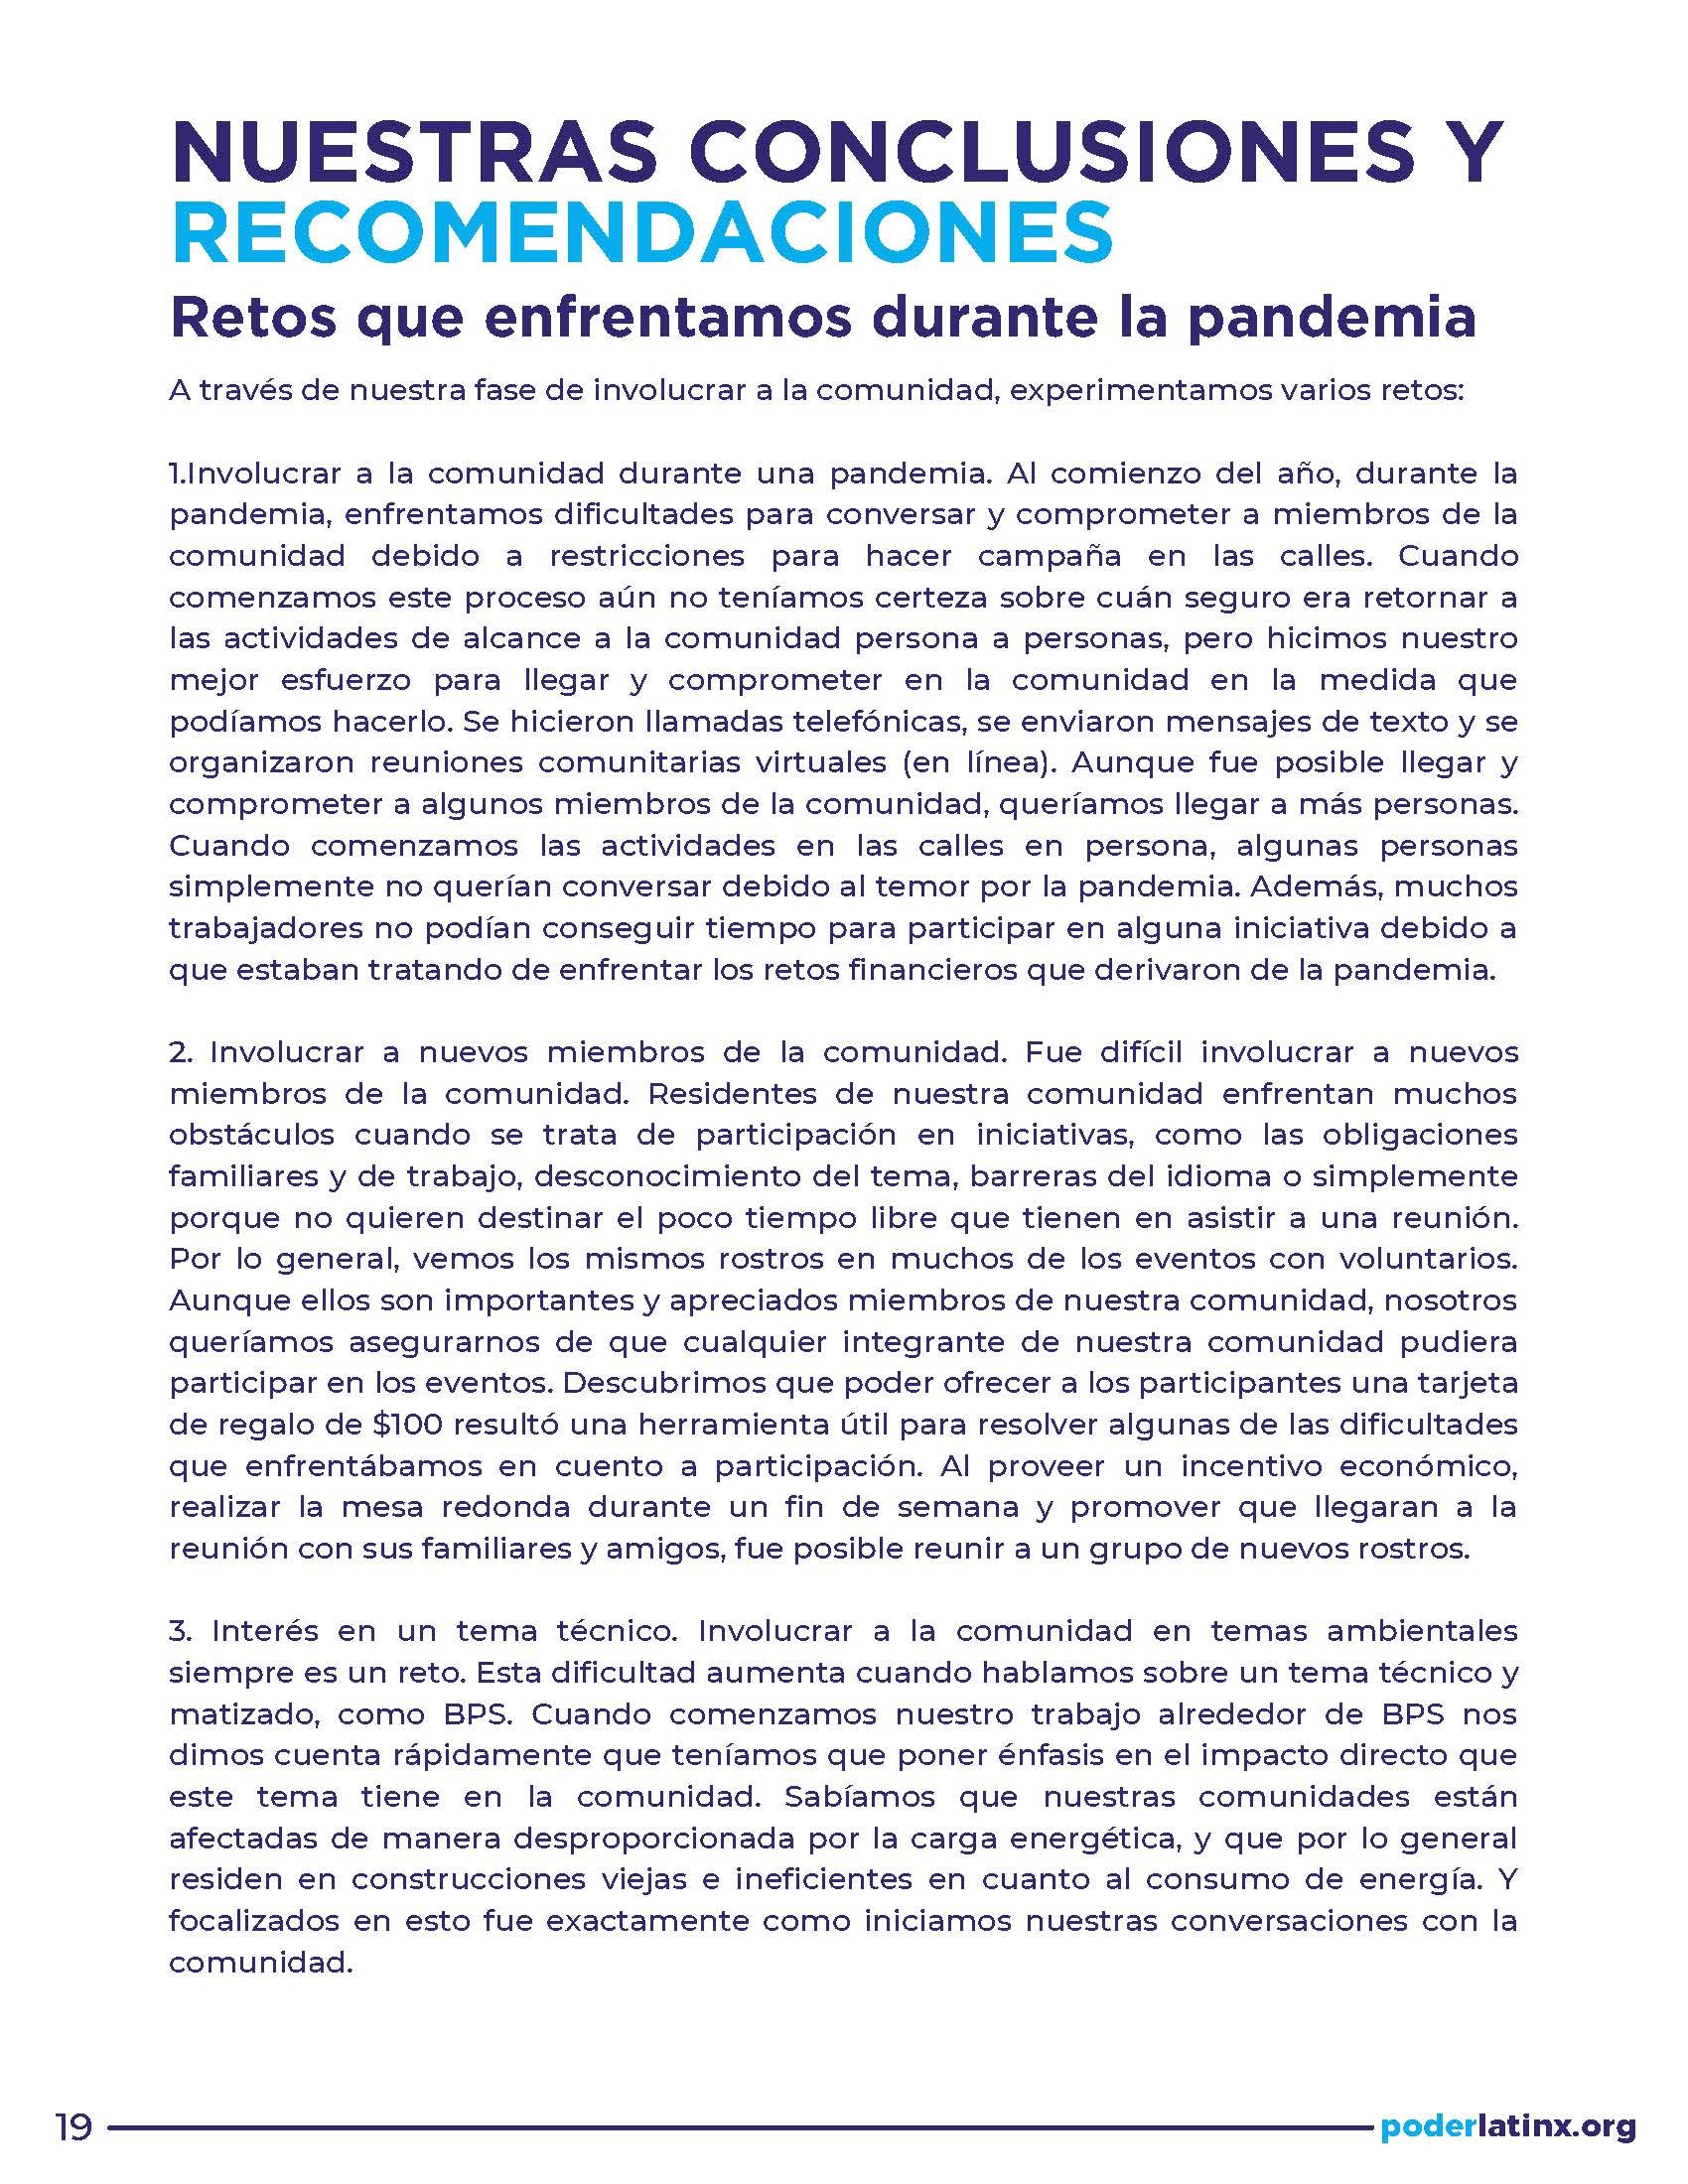 IMT Report - Spanish_Page_19.jpg